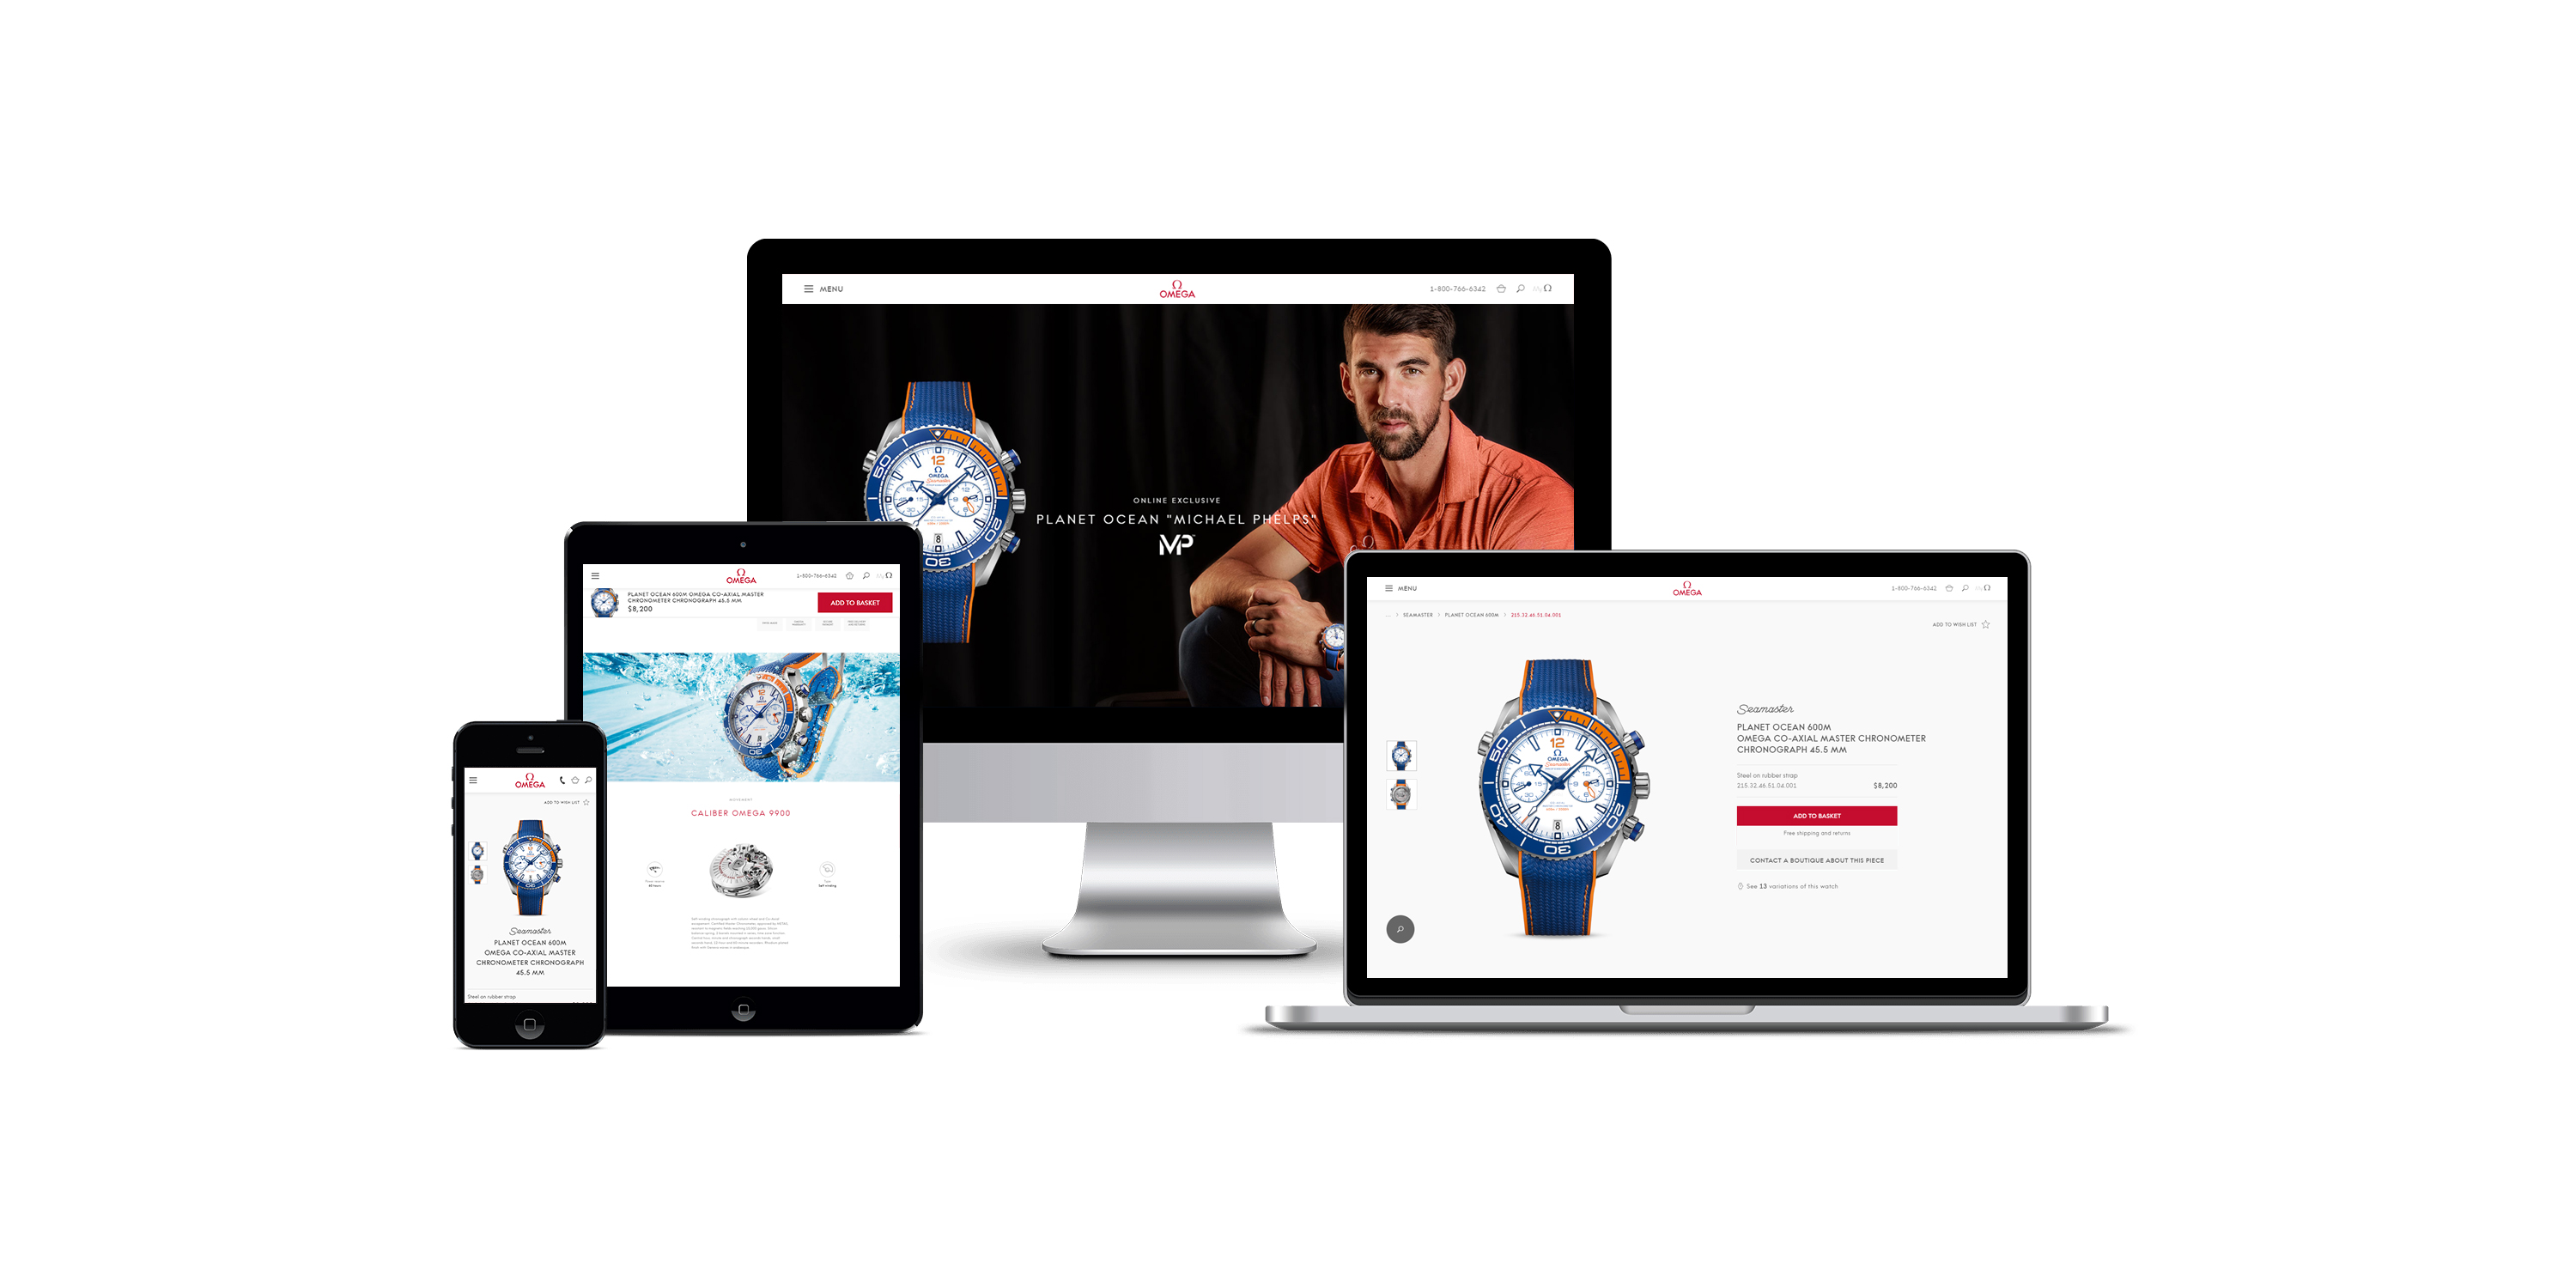 Swiss watchmaker Omega joins the ecommerce bandwagon